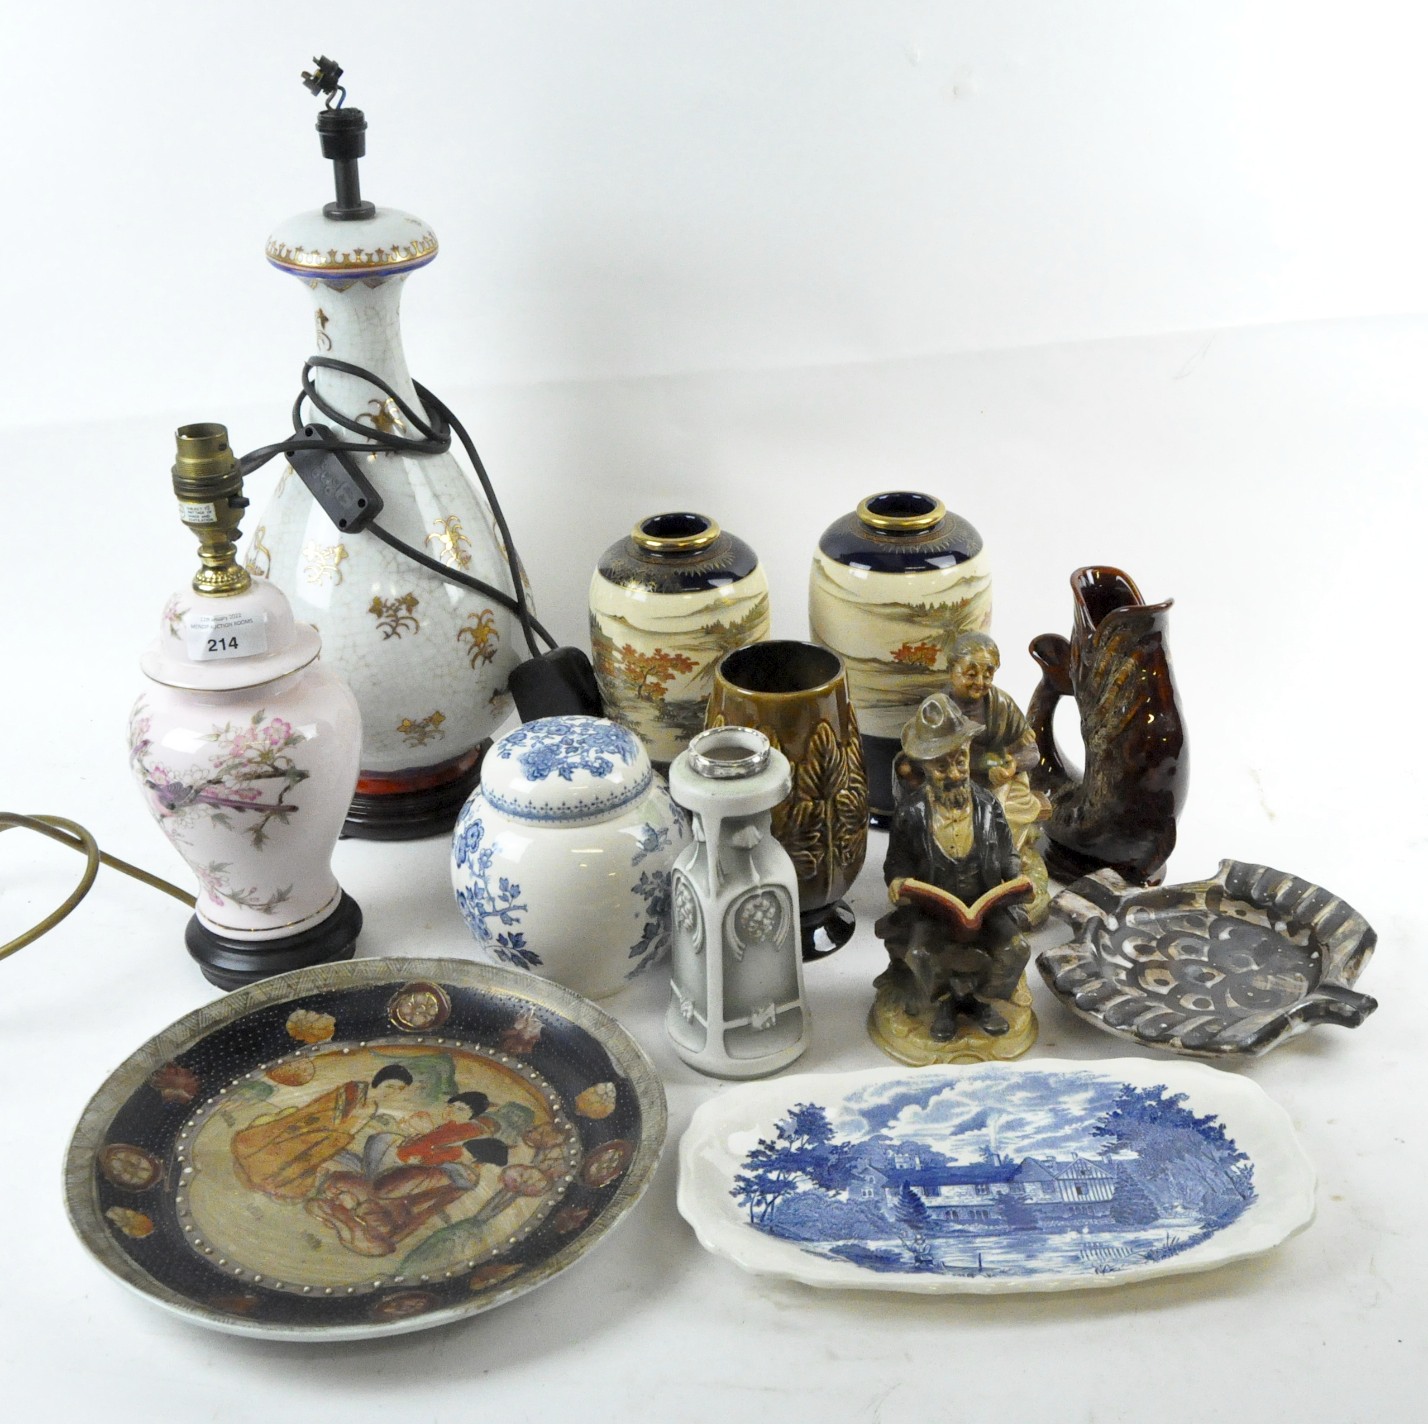 A collection of ceramics and collectables, including a pair of Japanese vases